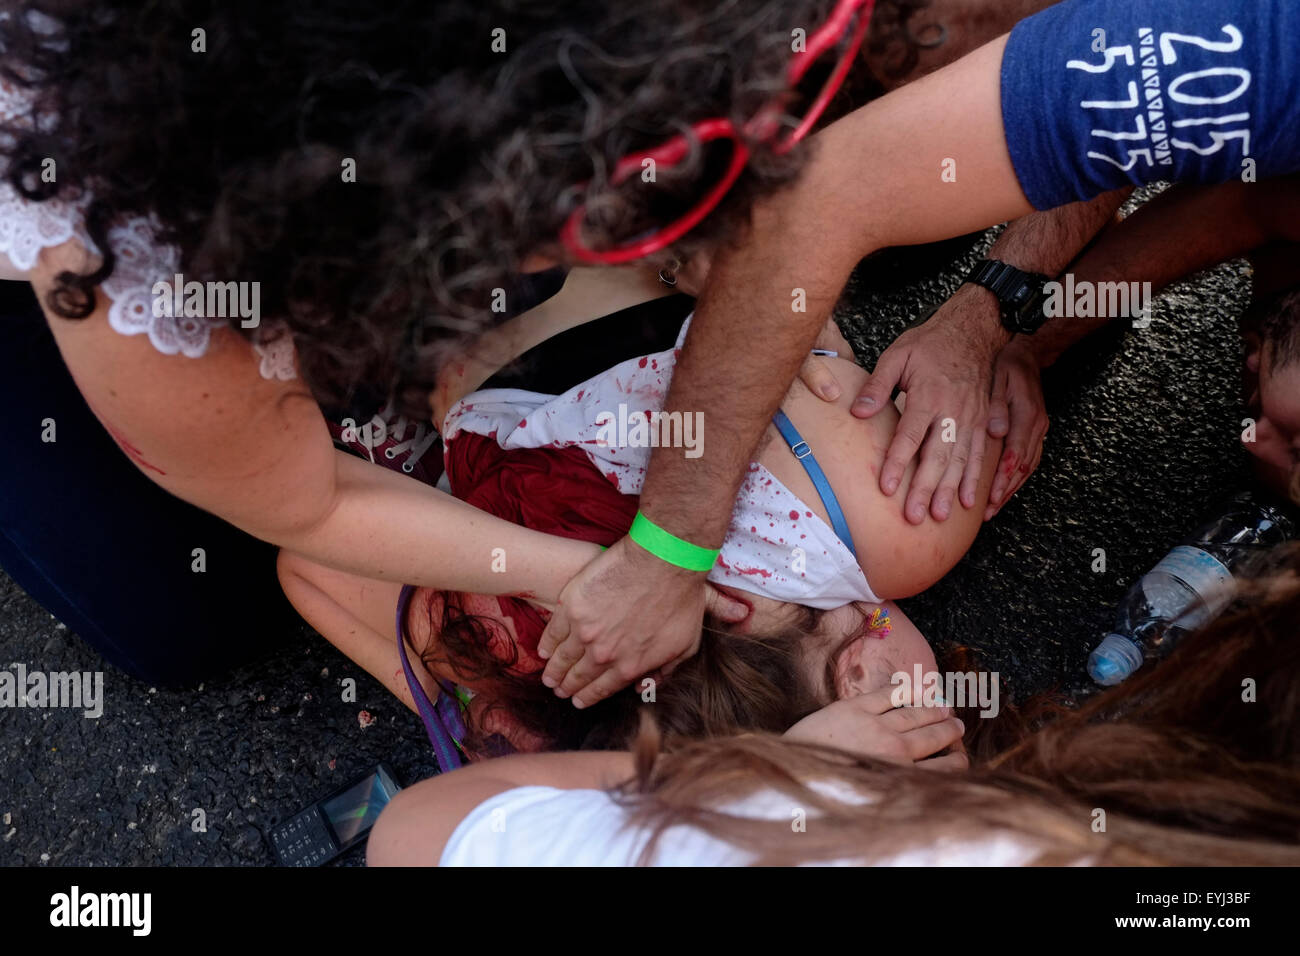 Young Israeli Shira Banki, 16, lies in the ground bleeding after being stabbed by an ultra Orthodox Jewish man at the annual Pride Parade in Jerusalem on 30 July 2015. Israel is widely seen as having liberal gay rights policies, despite the hostility shown towards homosexuals, particularly men, from the ultra-Orthodox Jewish community Credit:  Eddie Gerald/Alamy Live News Stock Photo